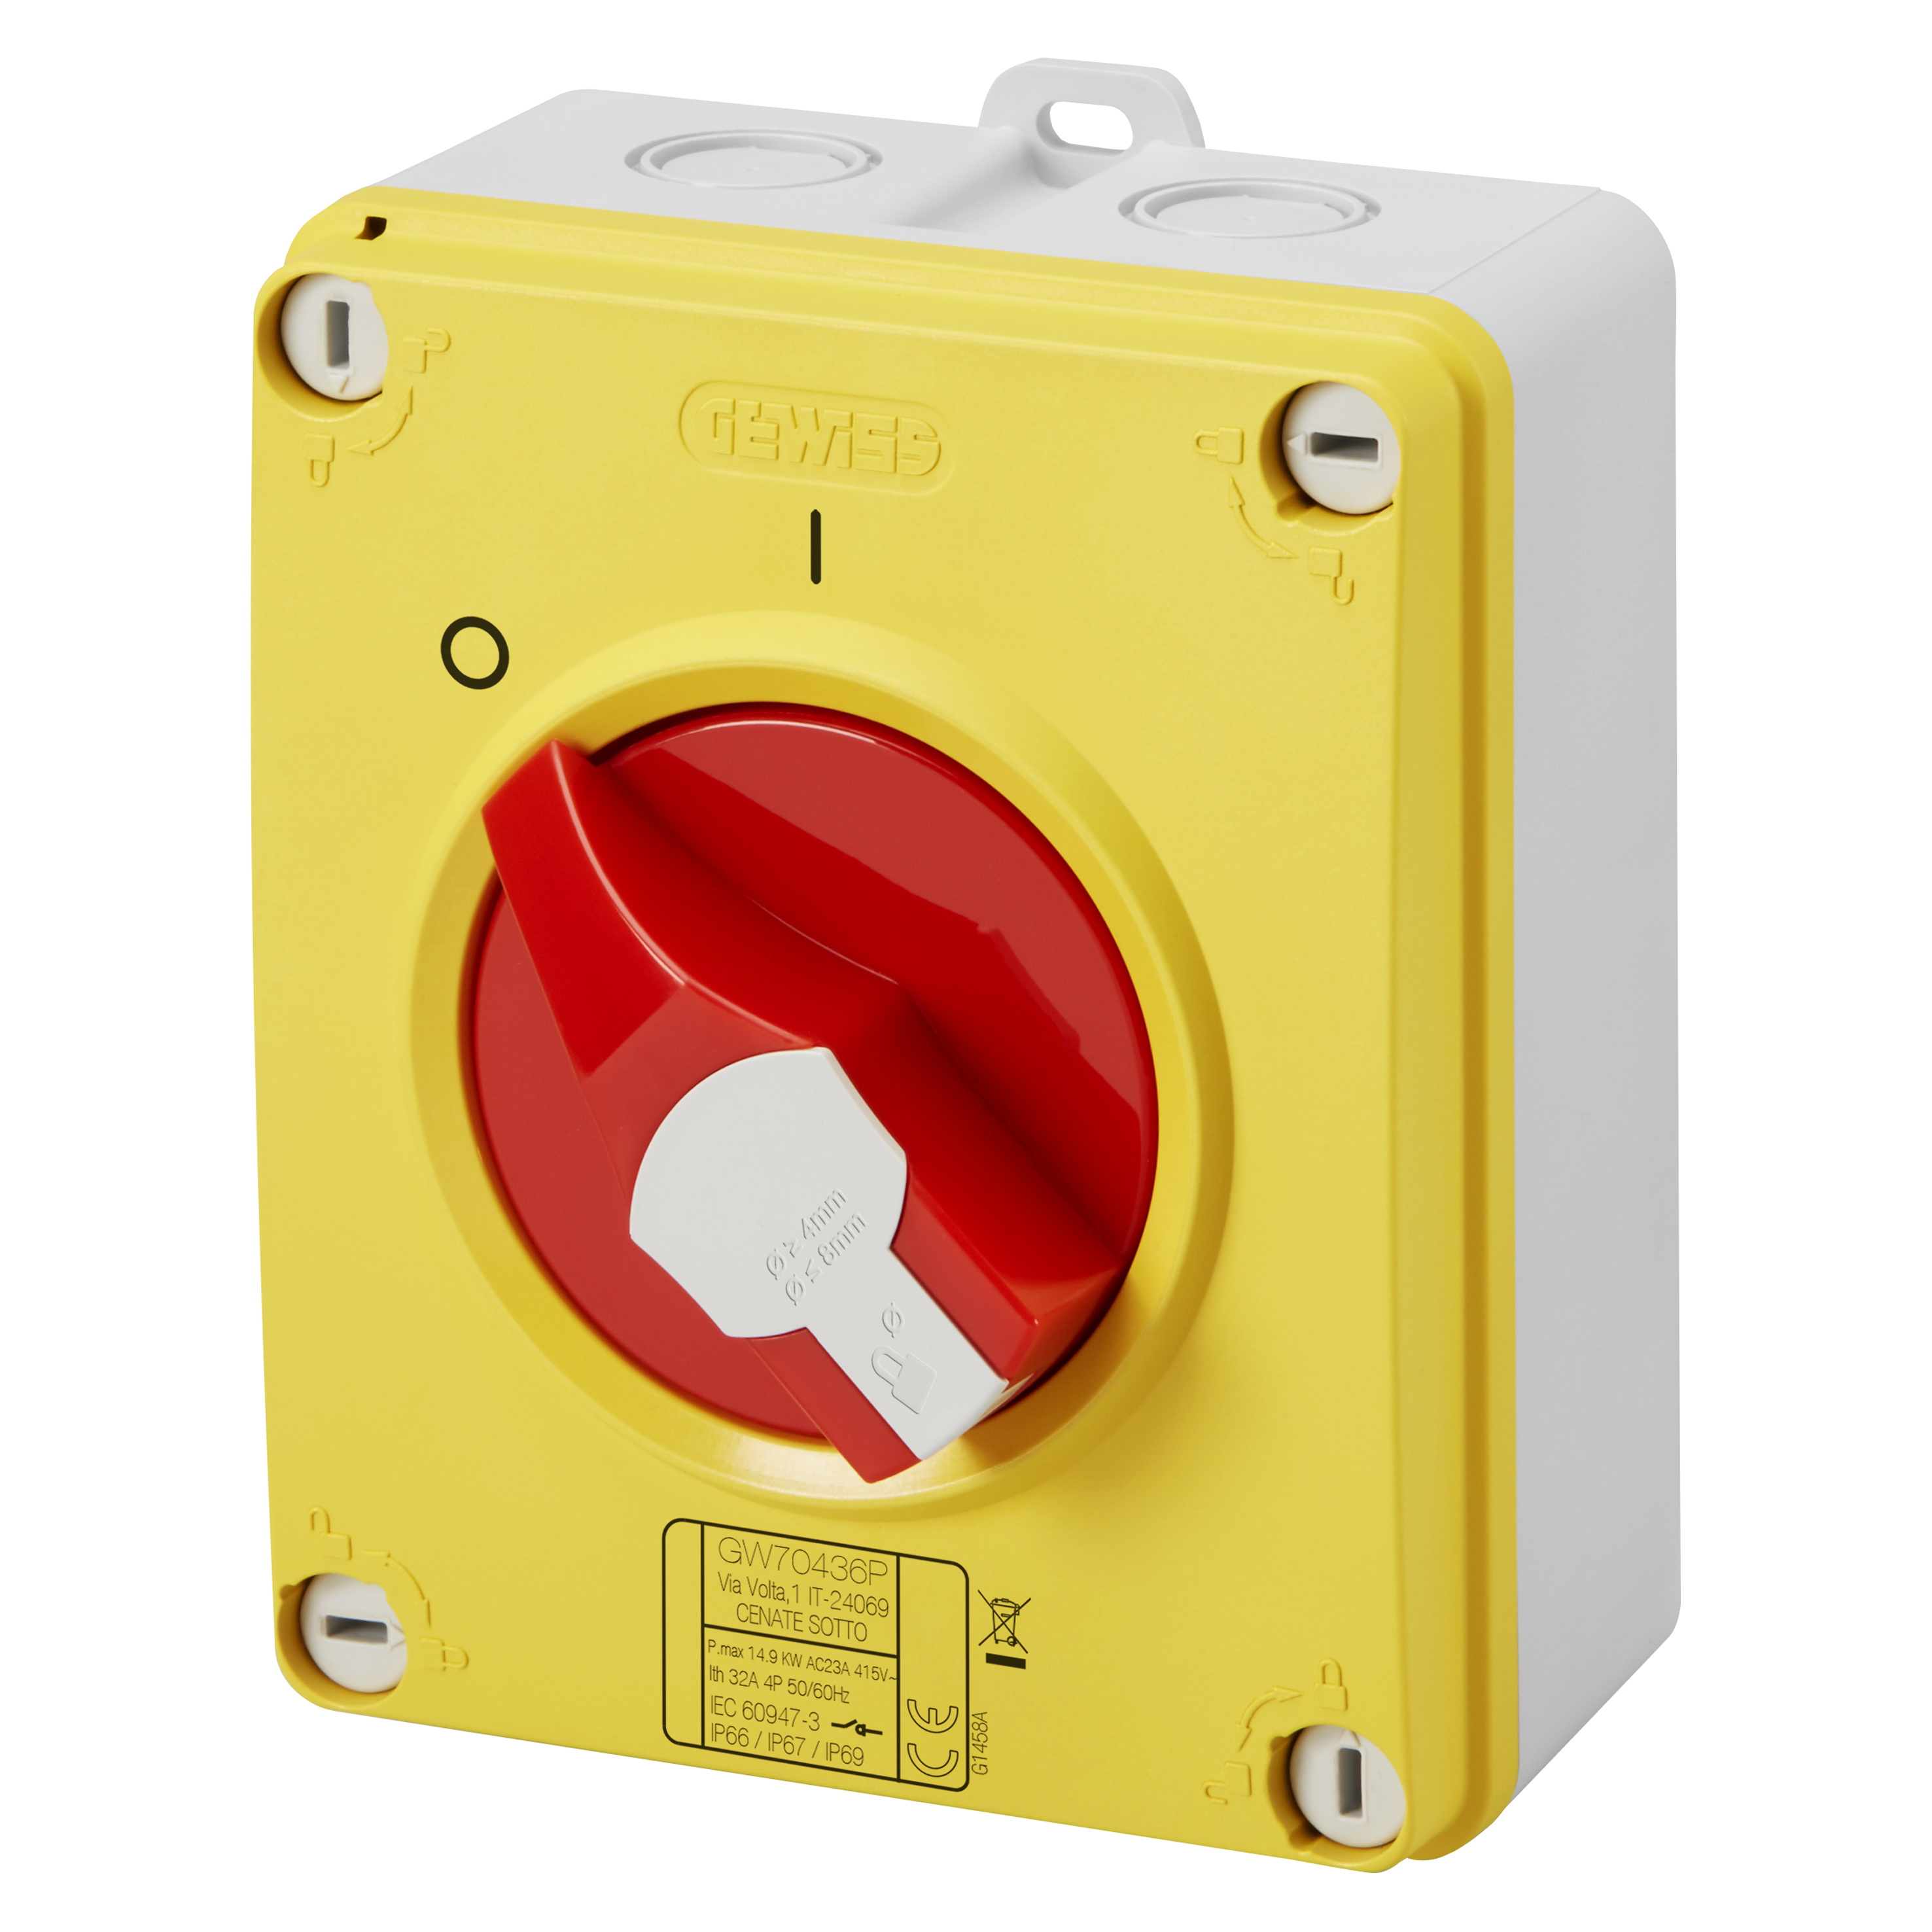 GW70443P Isolator - HP - Emergency - Isolating Material Box - 40A 4P - Lockable Red Knob - IP66/67/69